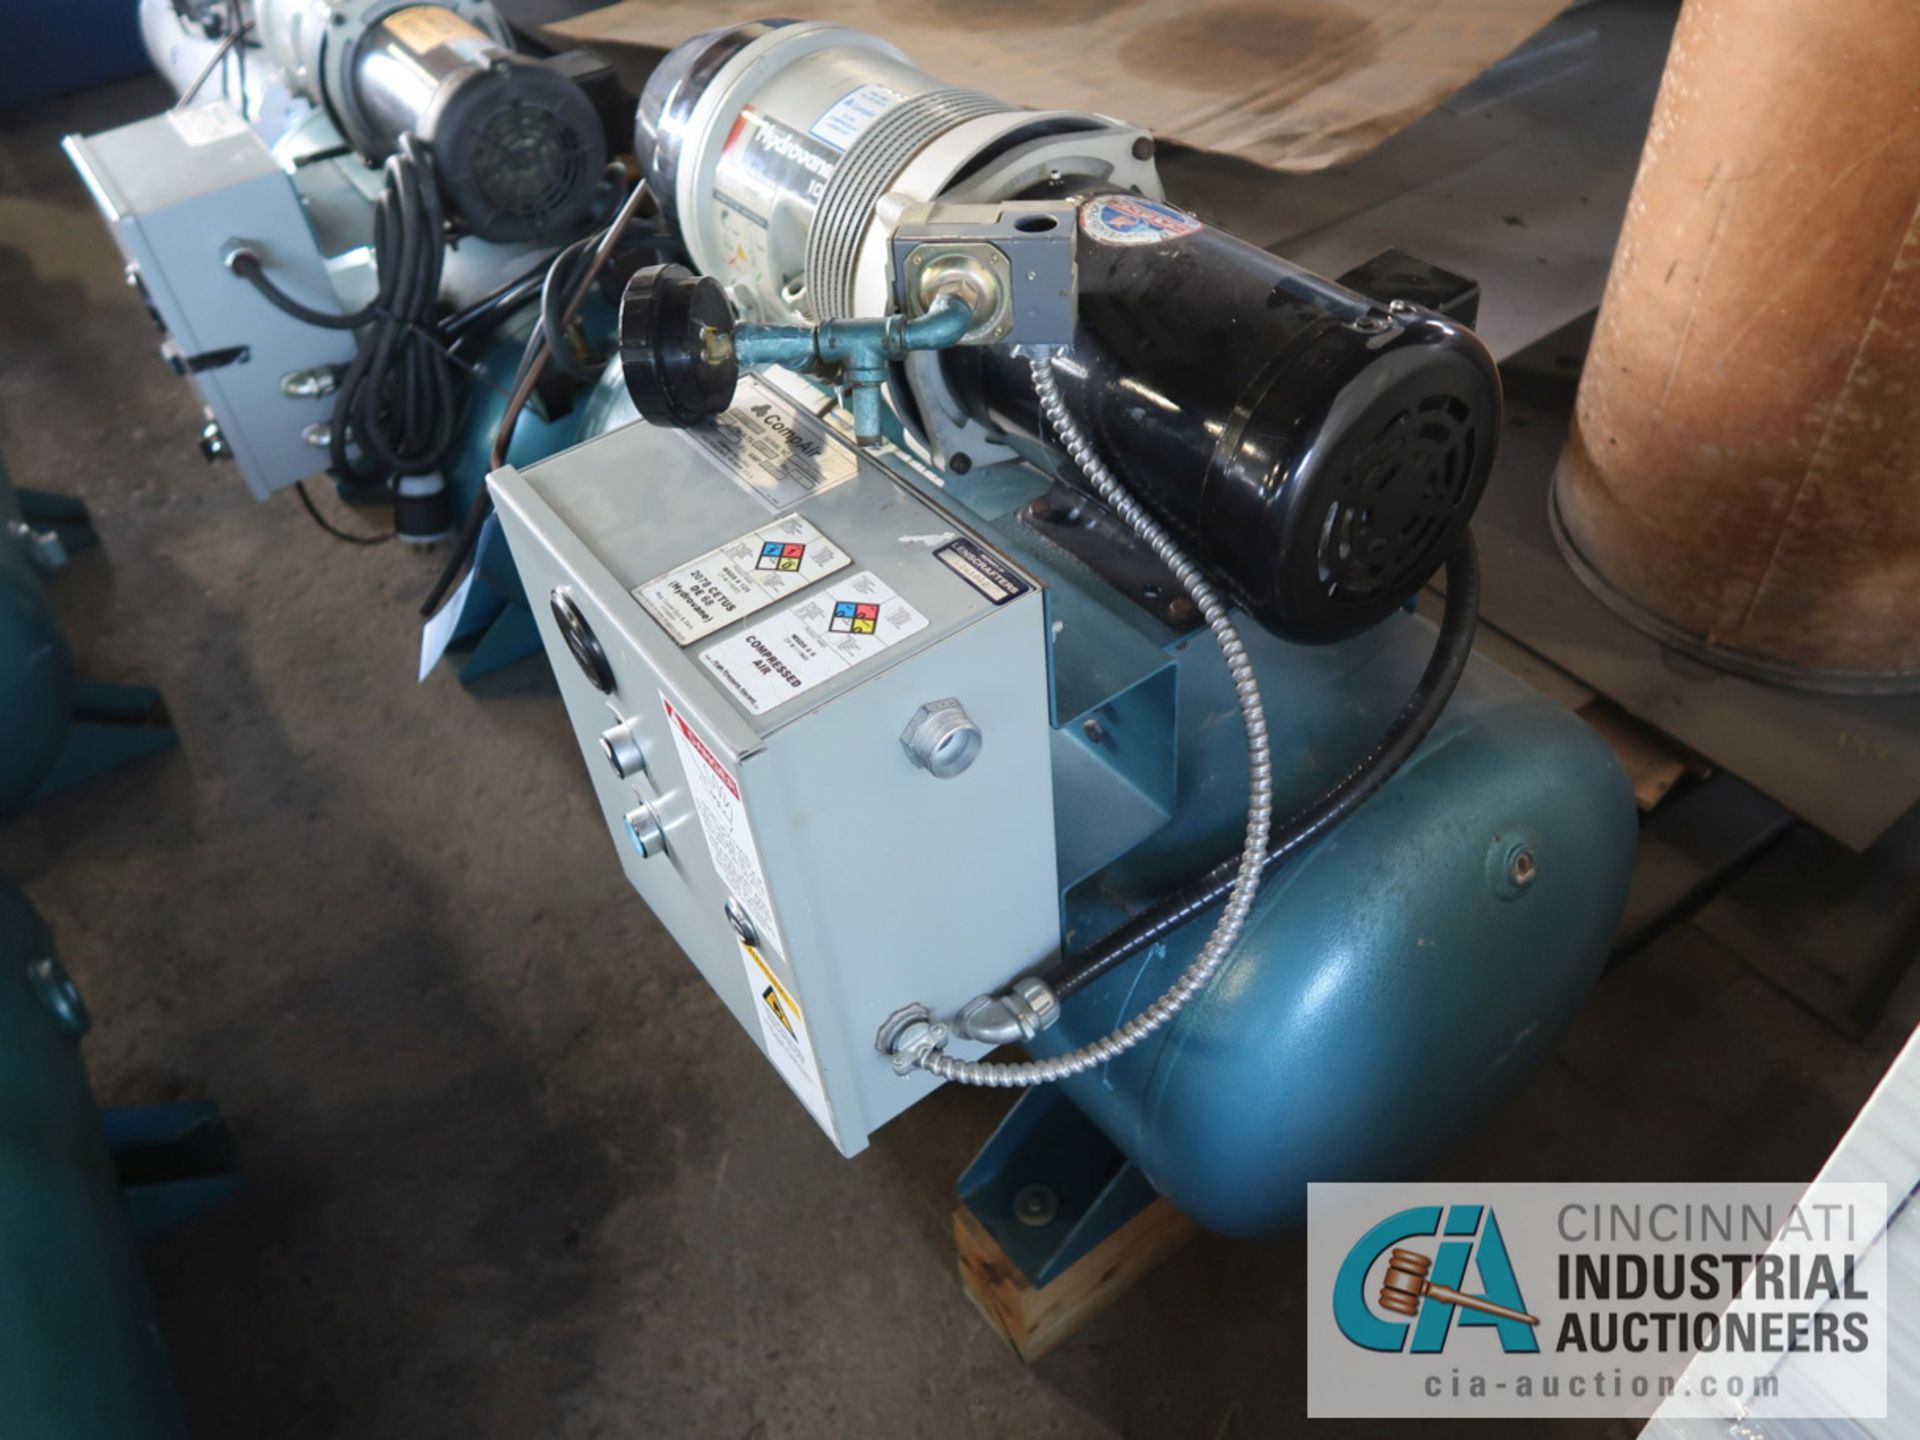 2 H.P. COMPAIR MODEL 10PURS HORIZONTAL TANK MOUNTED AIR COMPRESSOR, 30 GALLON, S/N ....0689 - Image 2 of 2